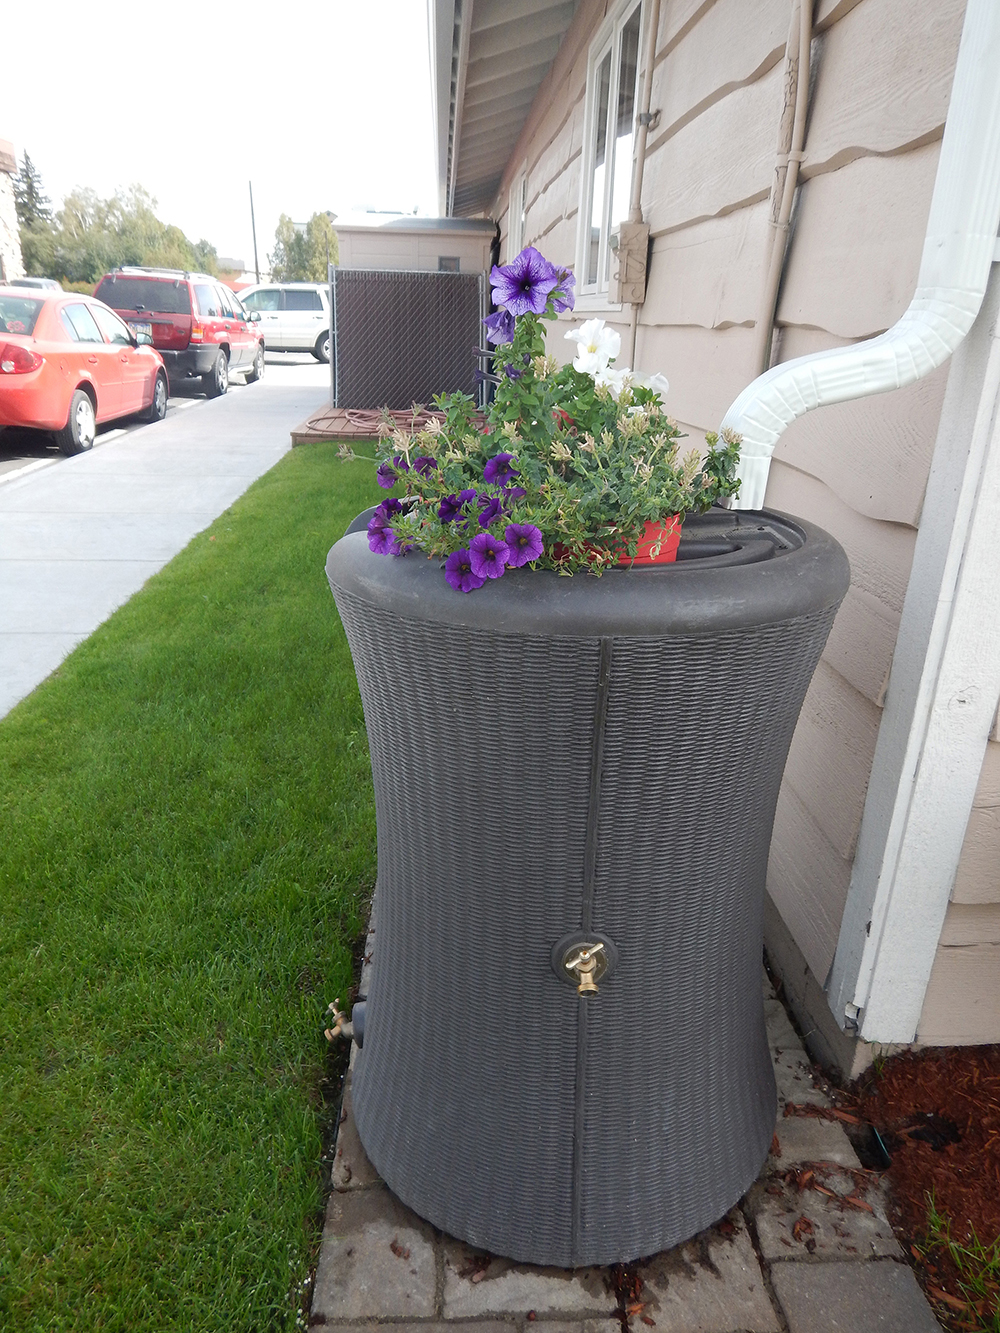 A Rain Water Barrel being used to reduce water pollution.